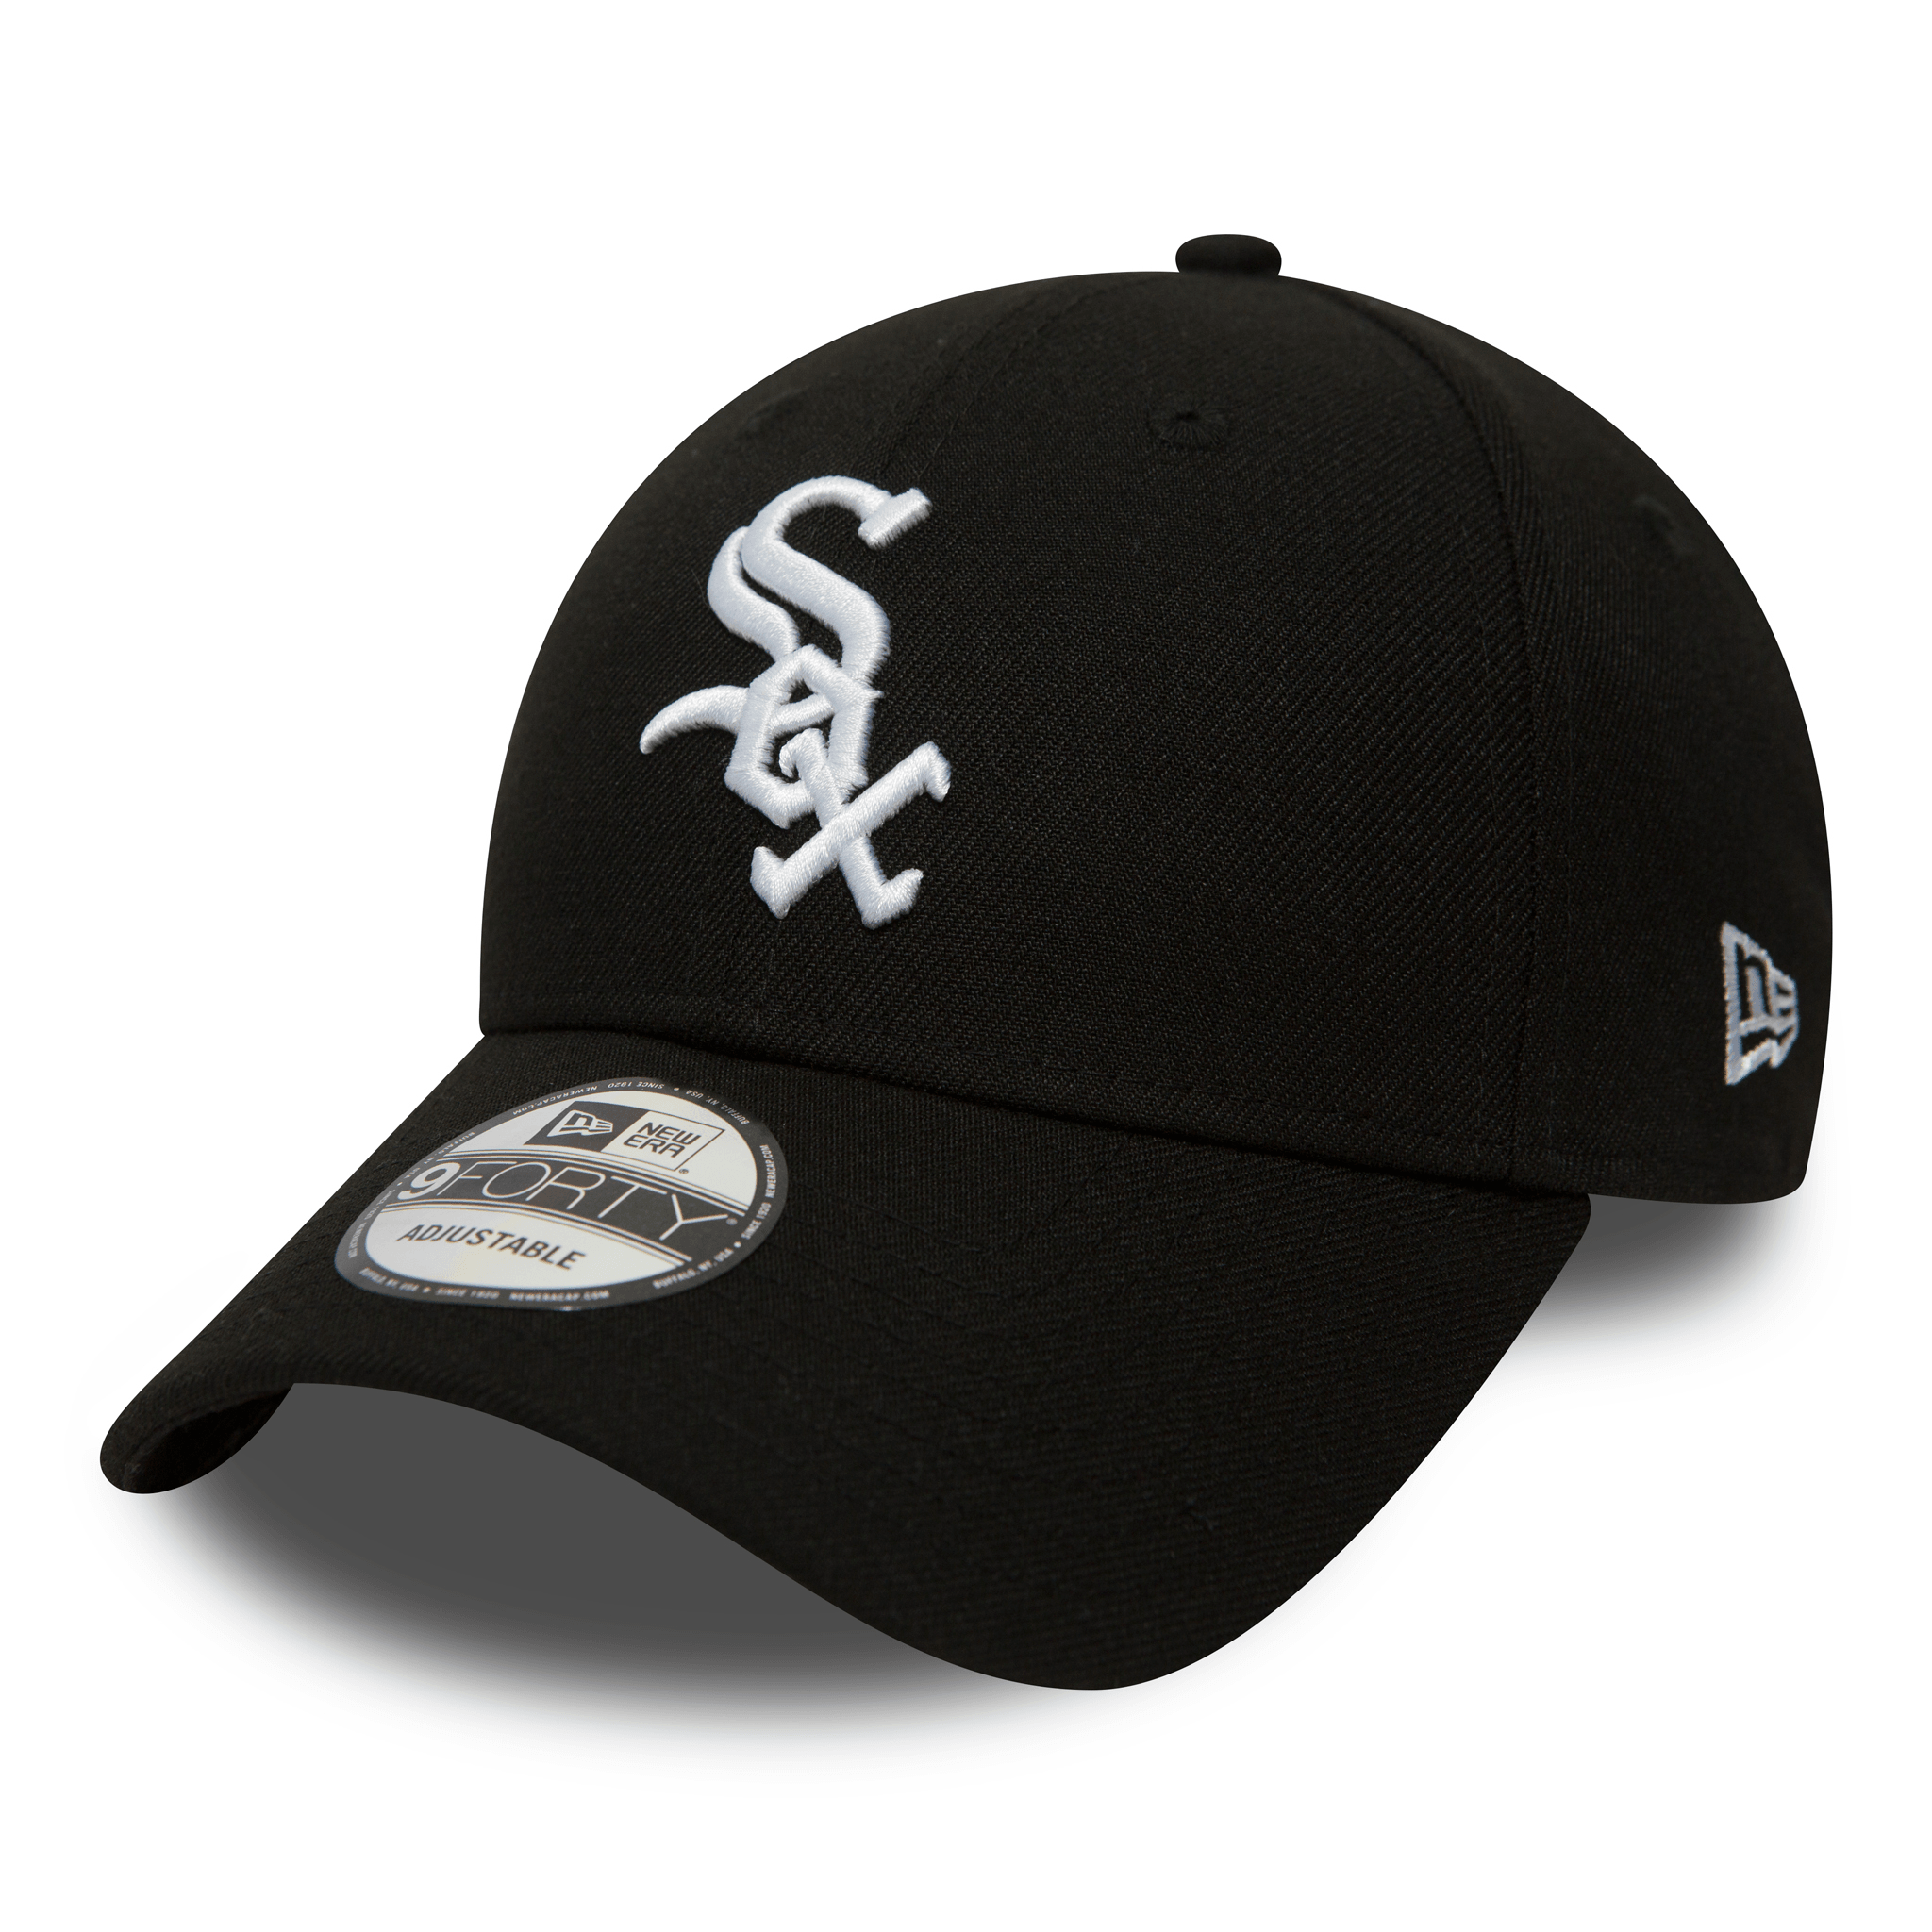 Amazoncom  MLB Youth The League Chicago White Sox 9Forty Adjustable Cap   Sports Fan Baseball Caps  Sports  Outdoors